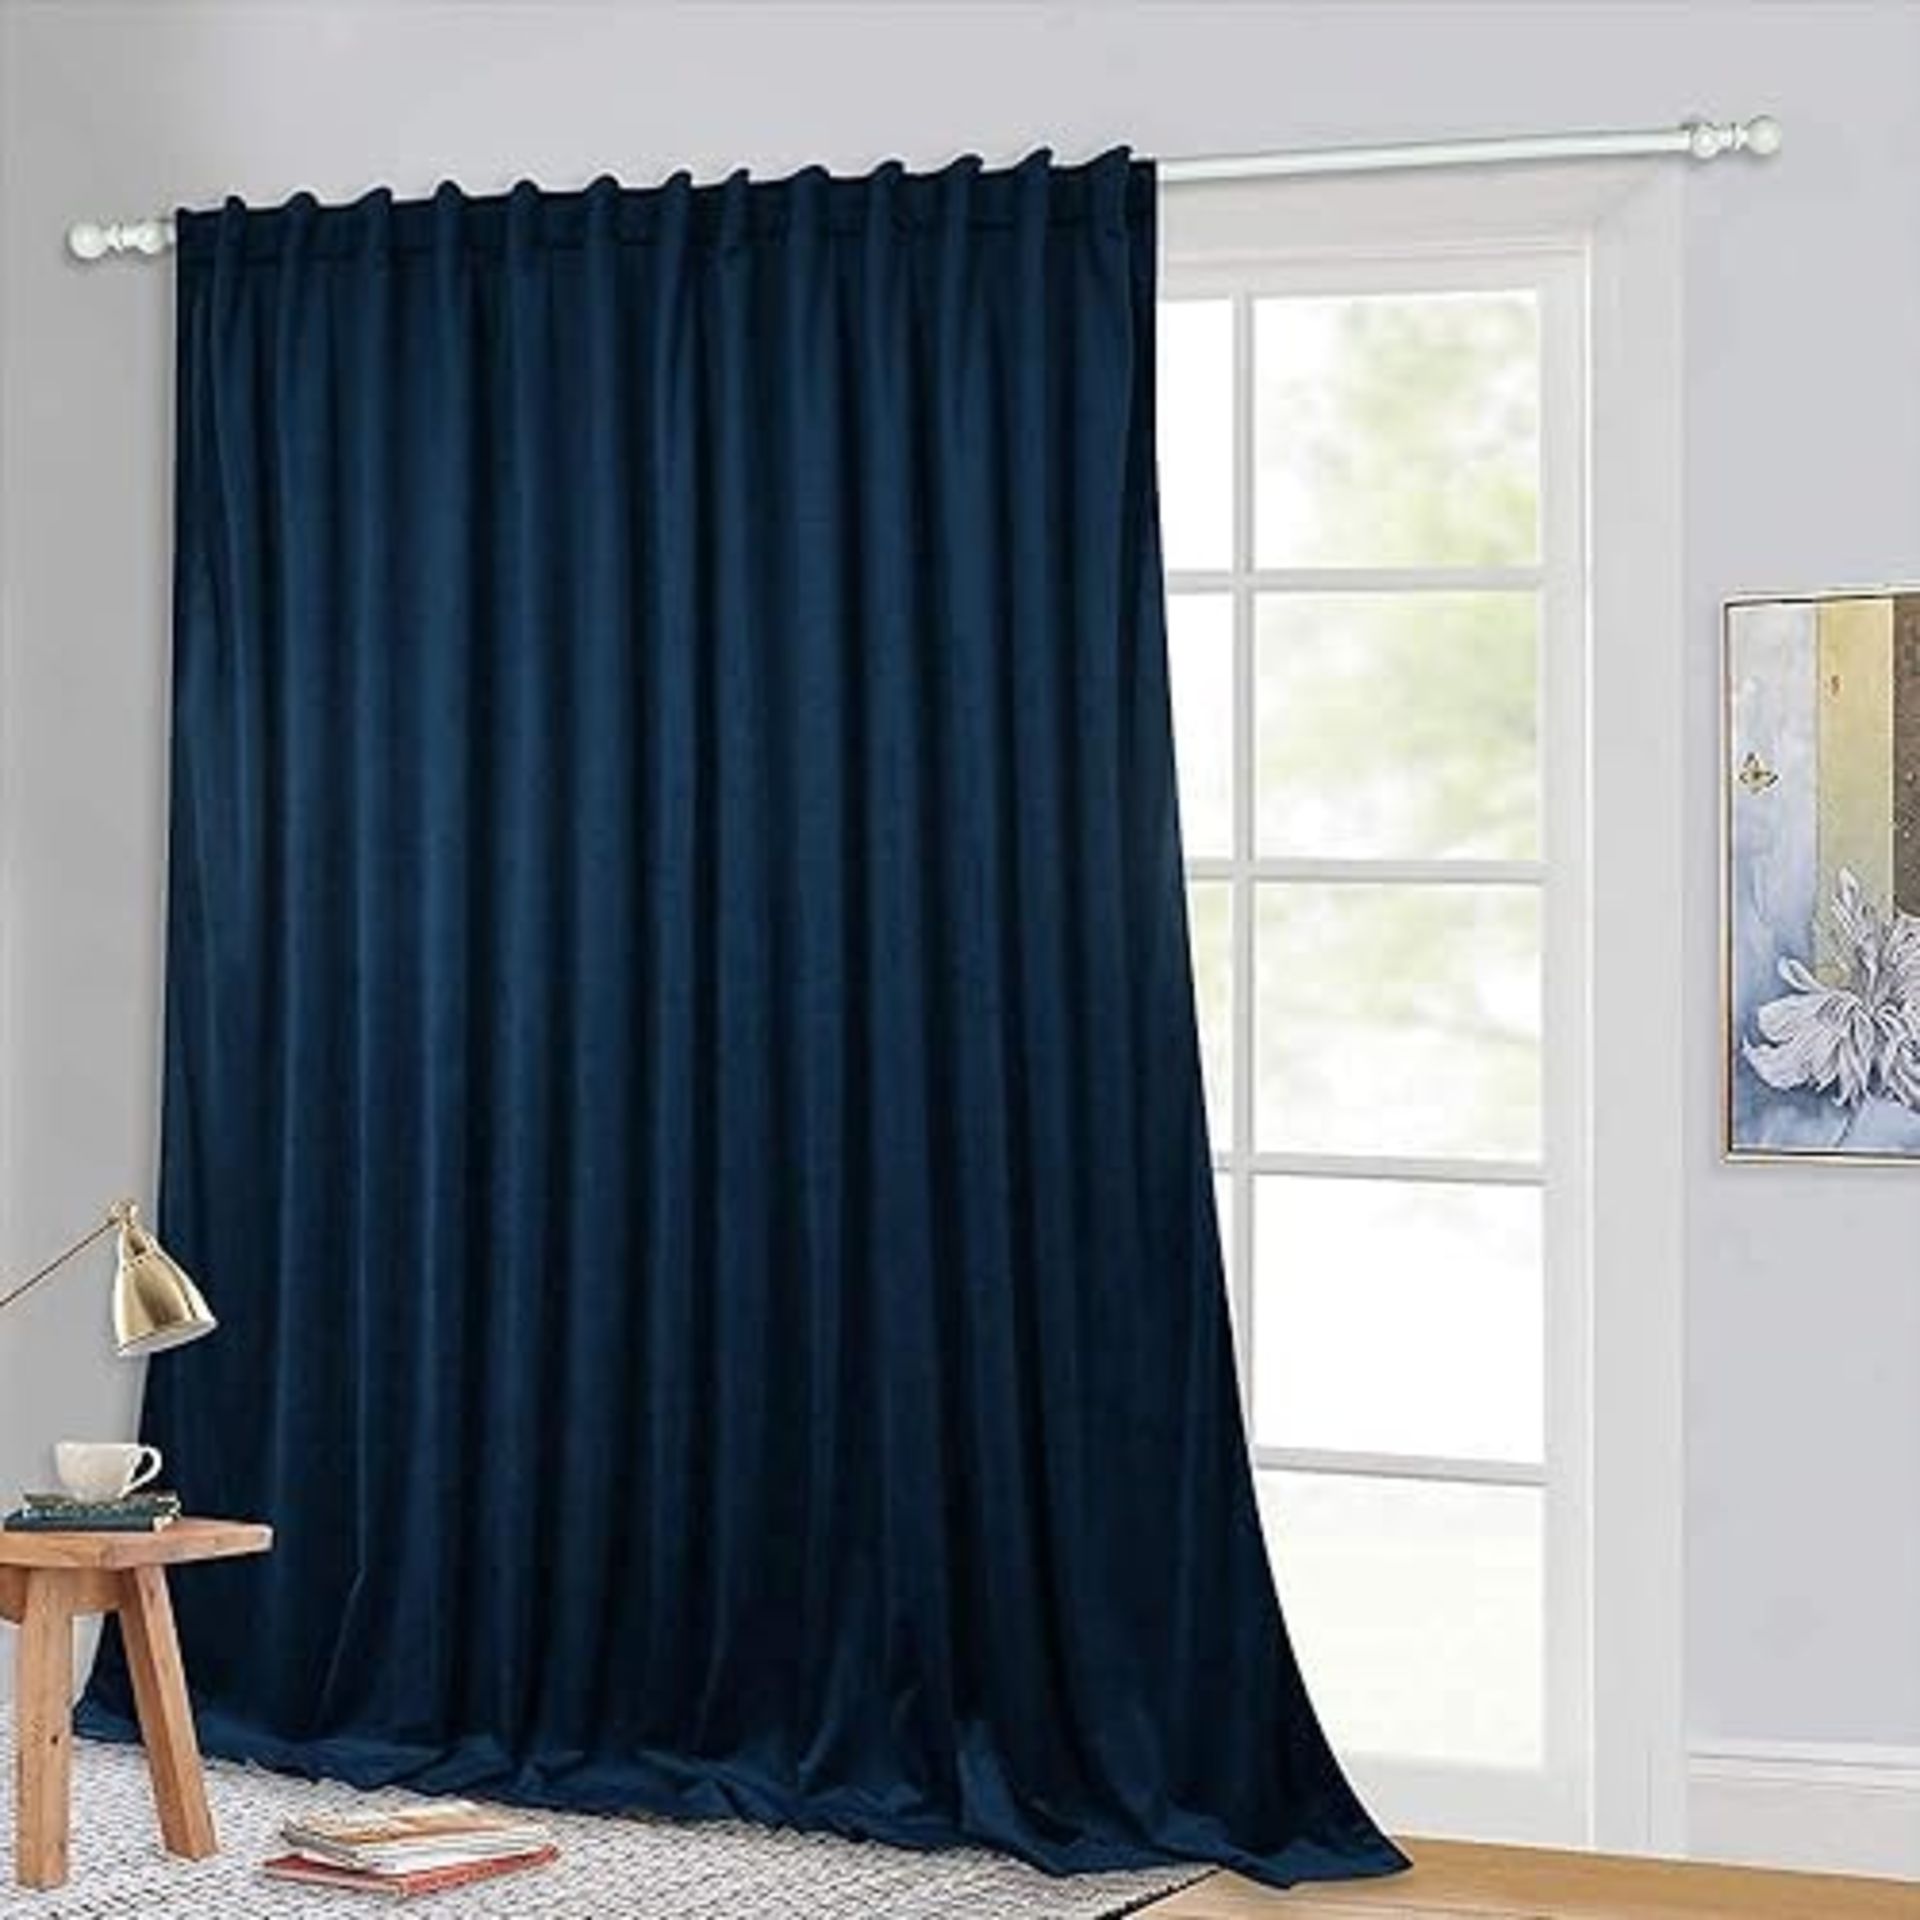 StangH Extra Long Backdrop Curtains Navy Blue Velvet Blackout Curtain Drapes Thermal Energy Efficie